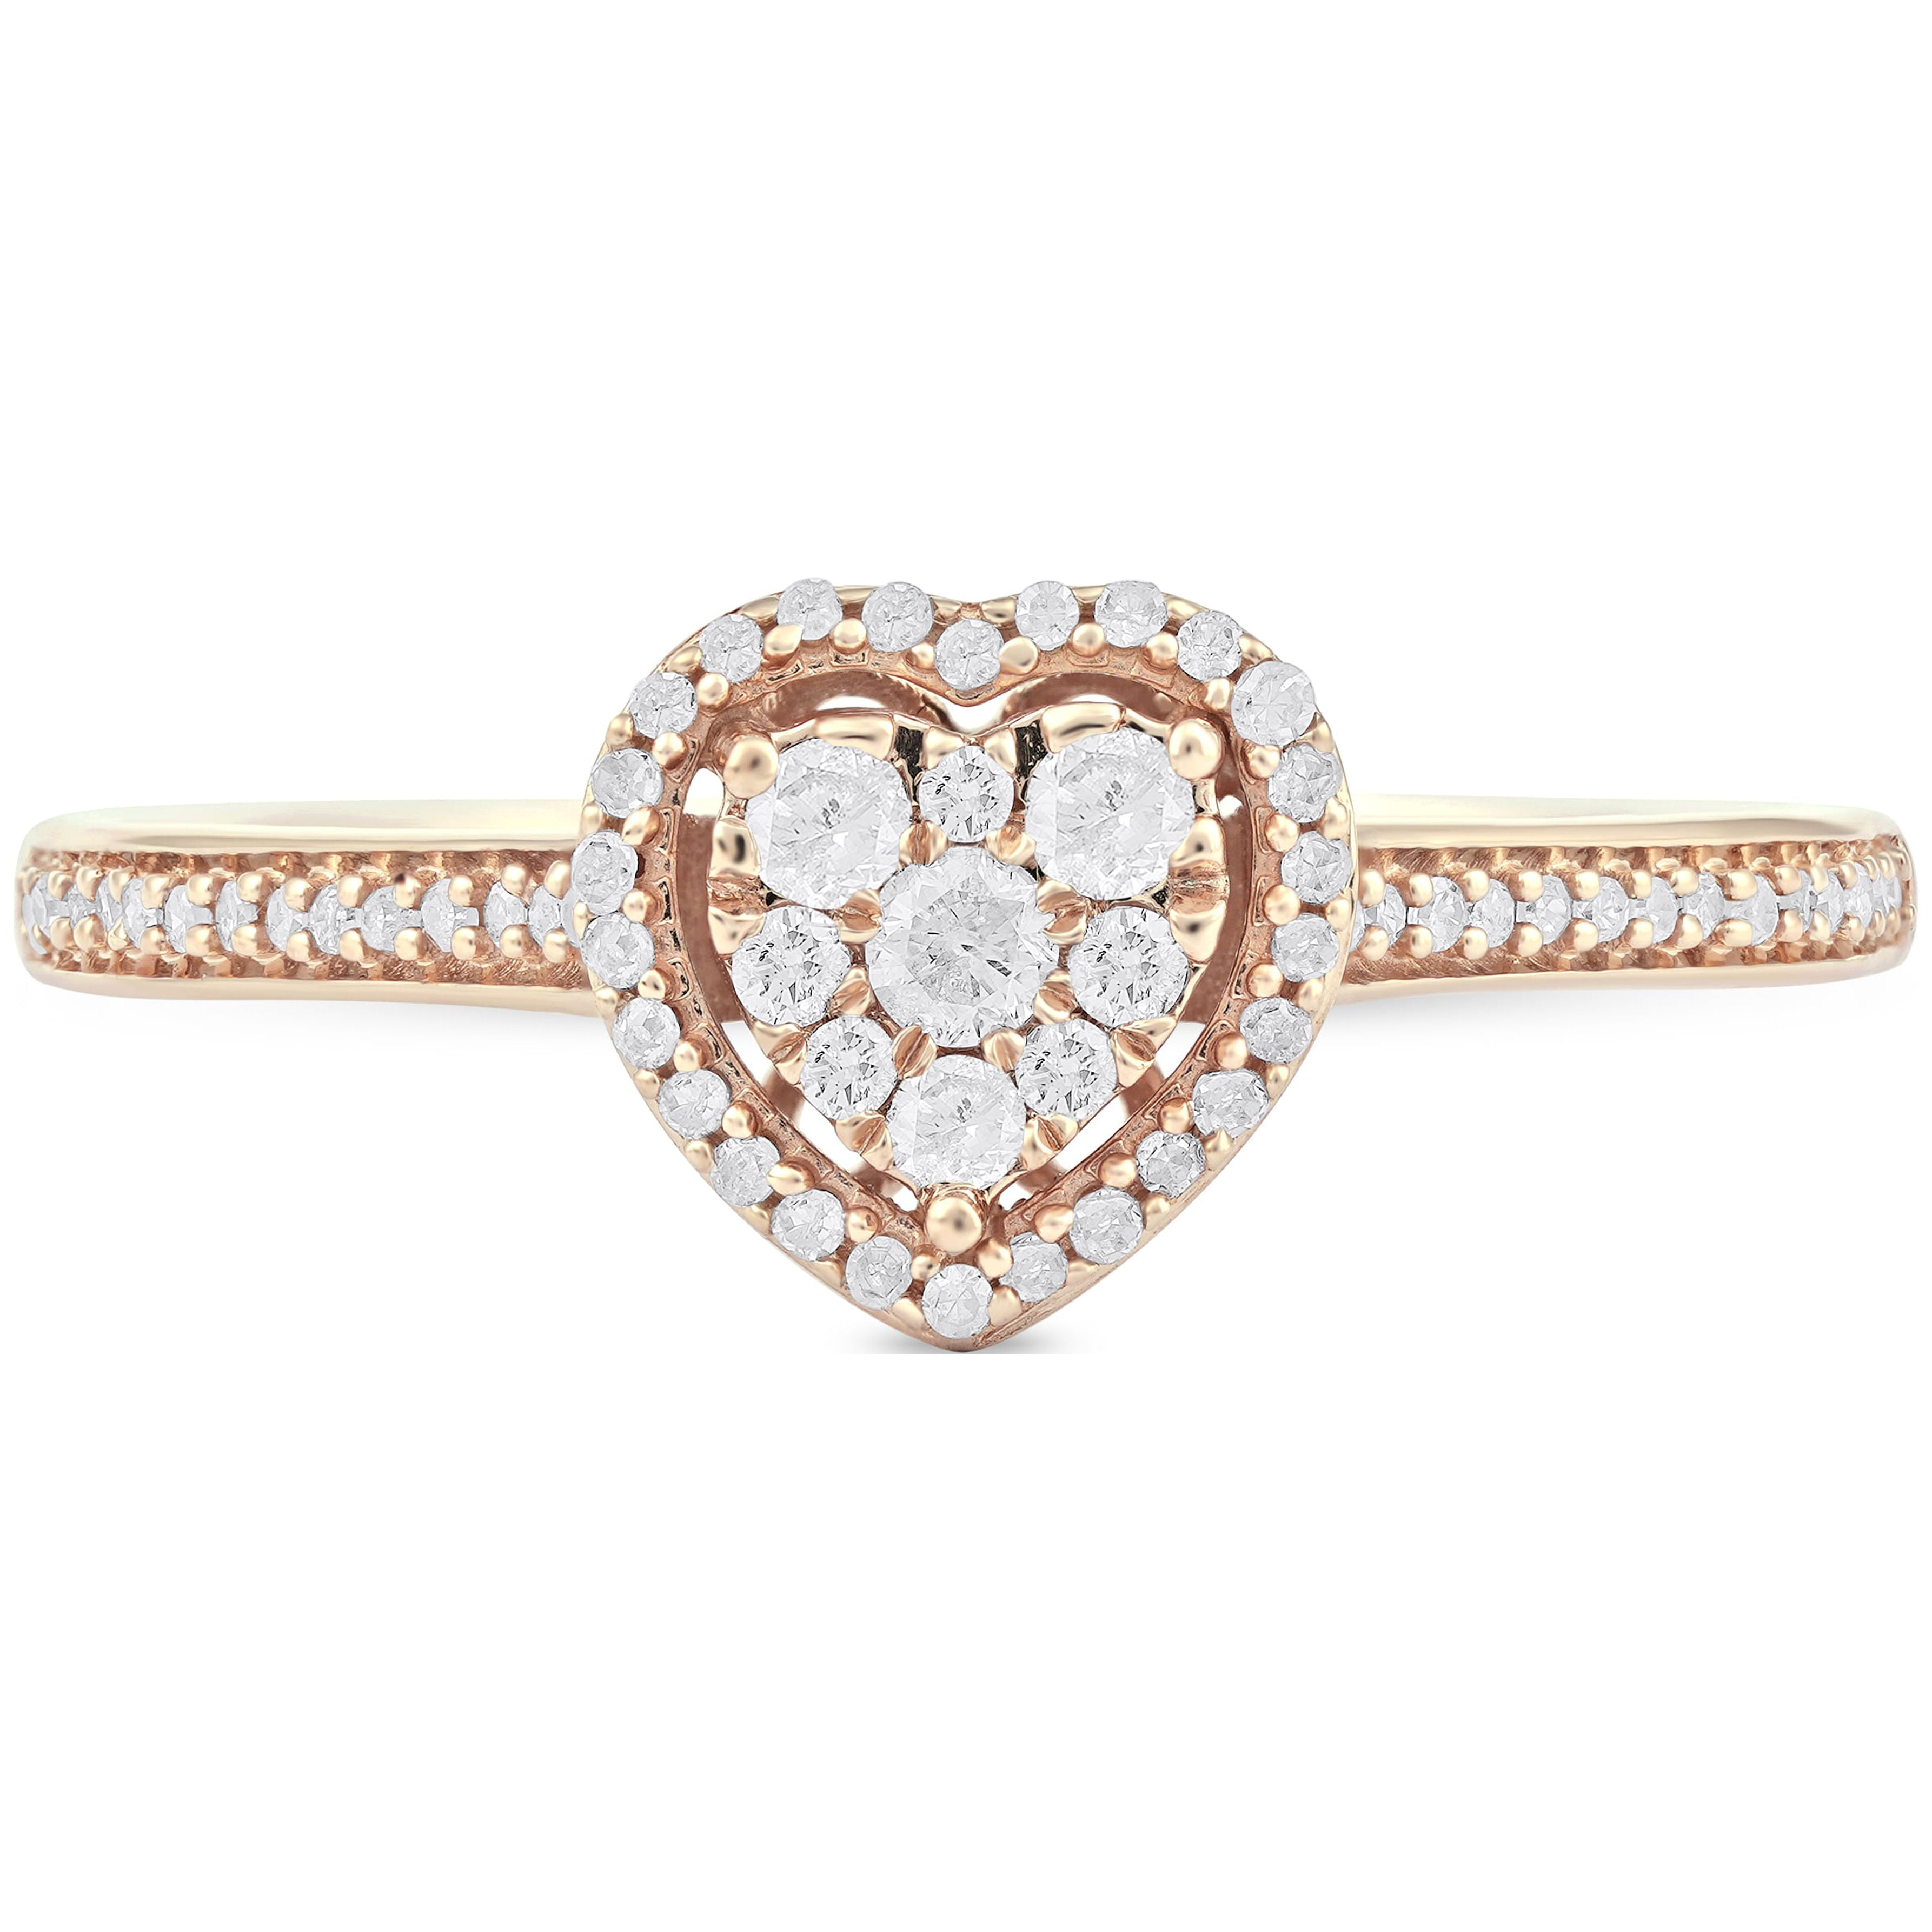 2ct Heart Cut Diamond Ring with Gold, Latest Design